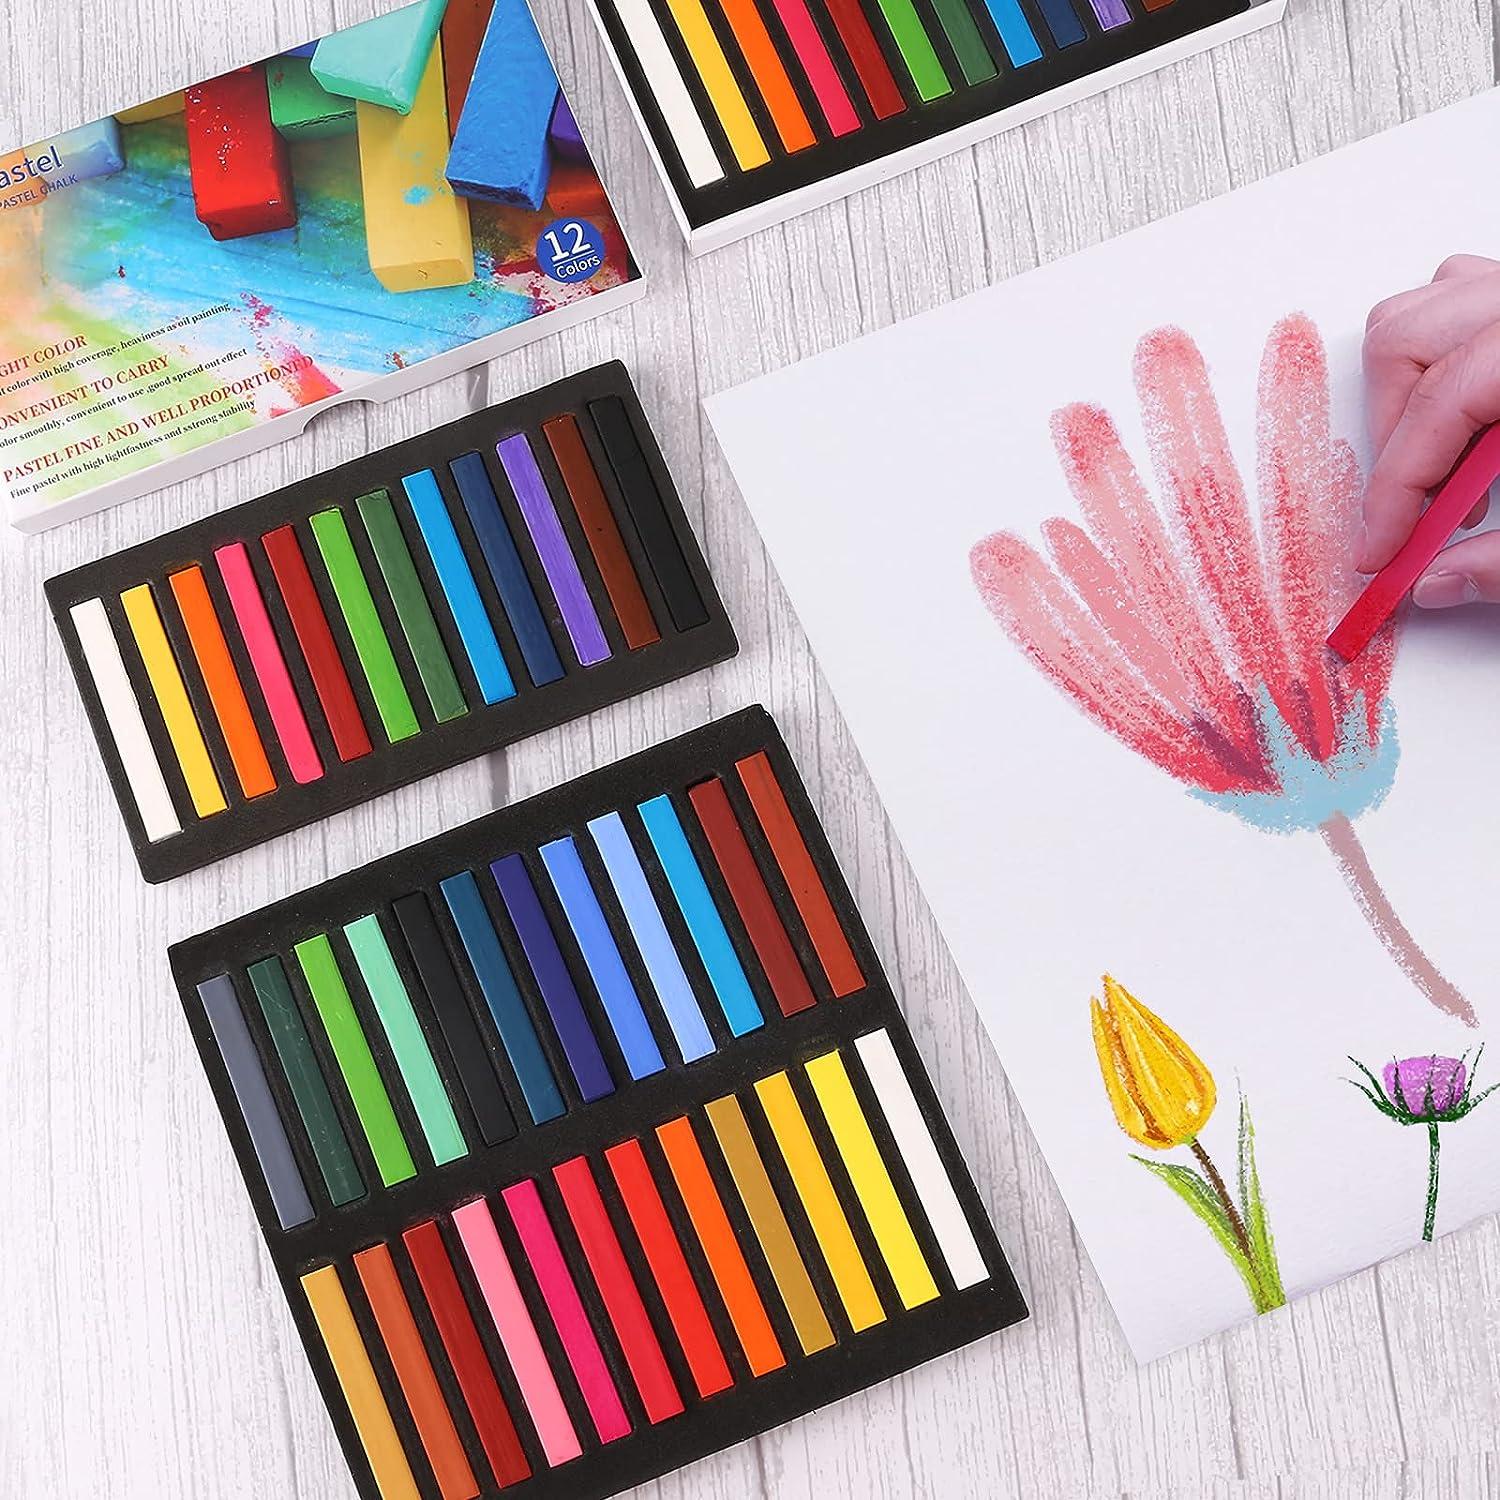 LOONENG Non Toxic Soft Pastels Chalk Soft Chalk Pastels Stick for Crafts  Projects Drawing Blending Layering Shading 24 Brilliant Assorted Colors 24  Colors